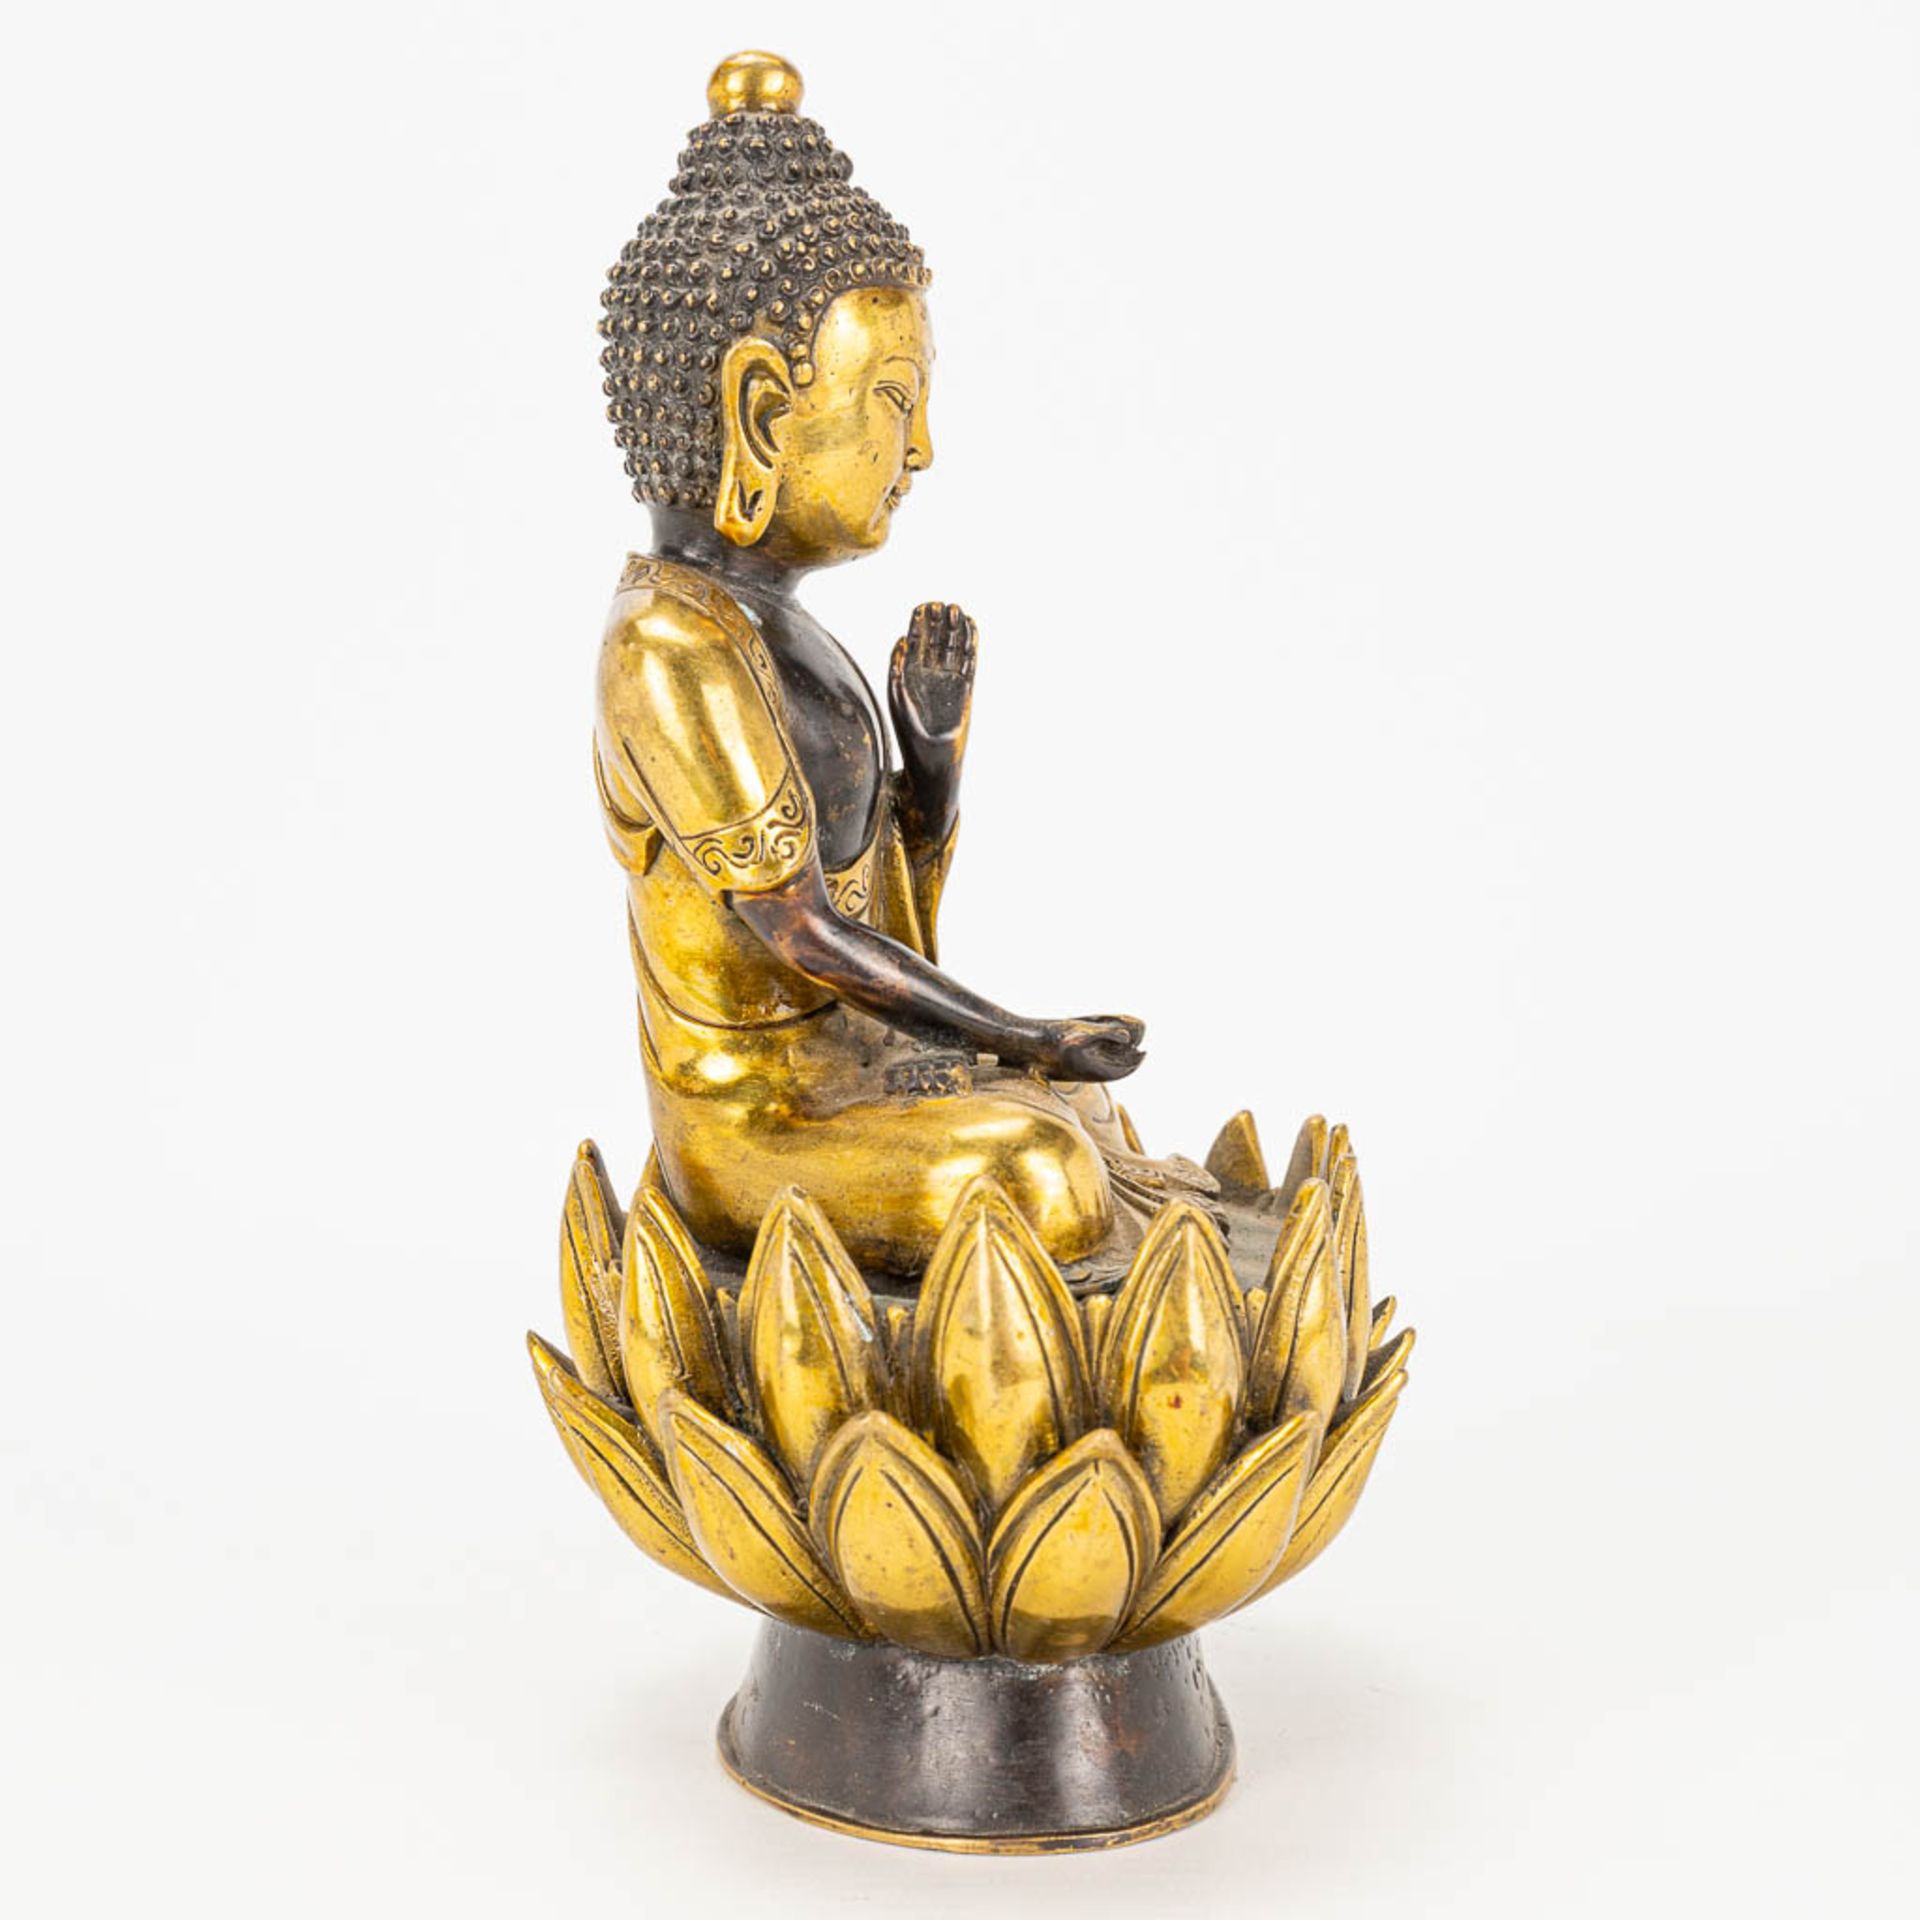 A Buddha on a lotus flower made of bronze. - Image 2 of 11